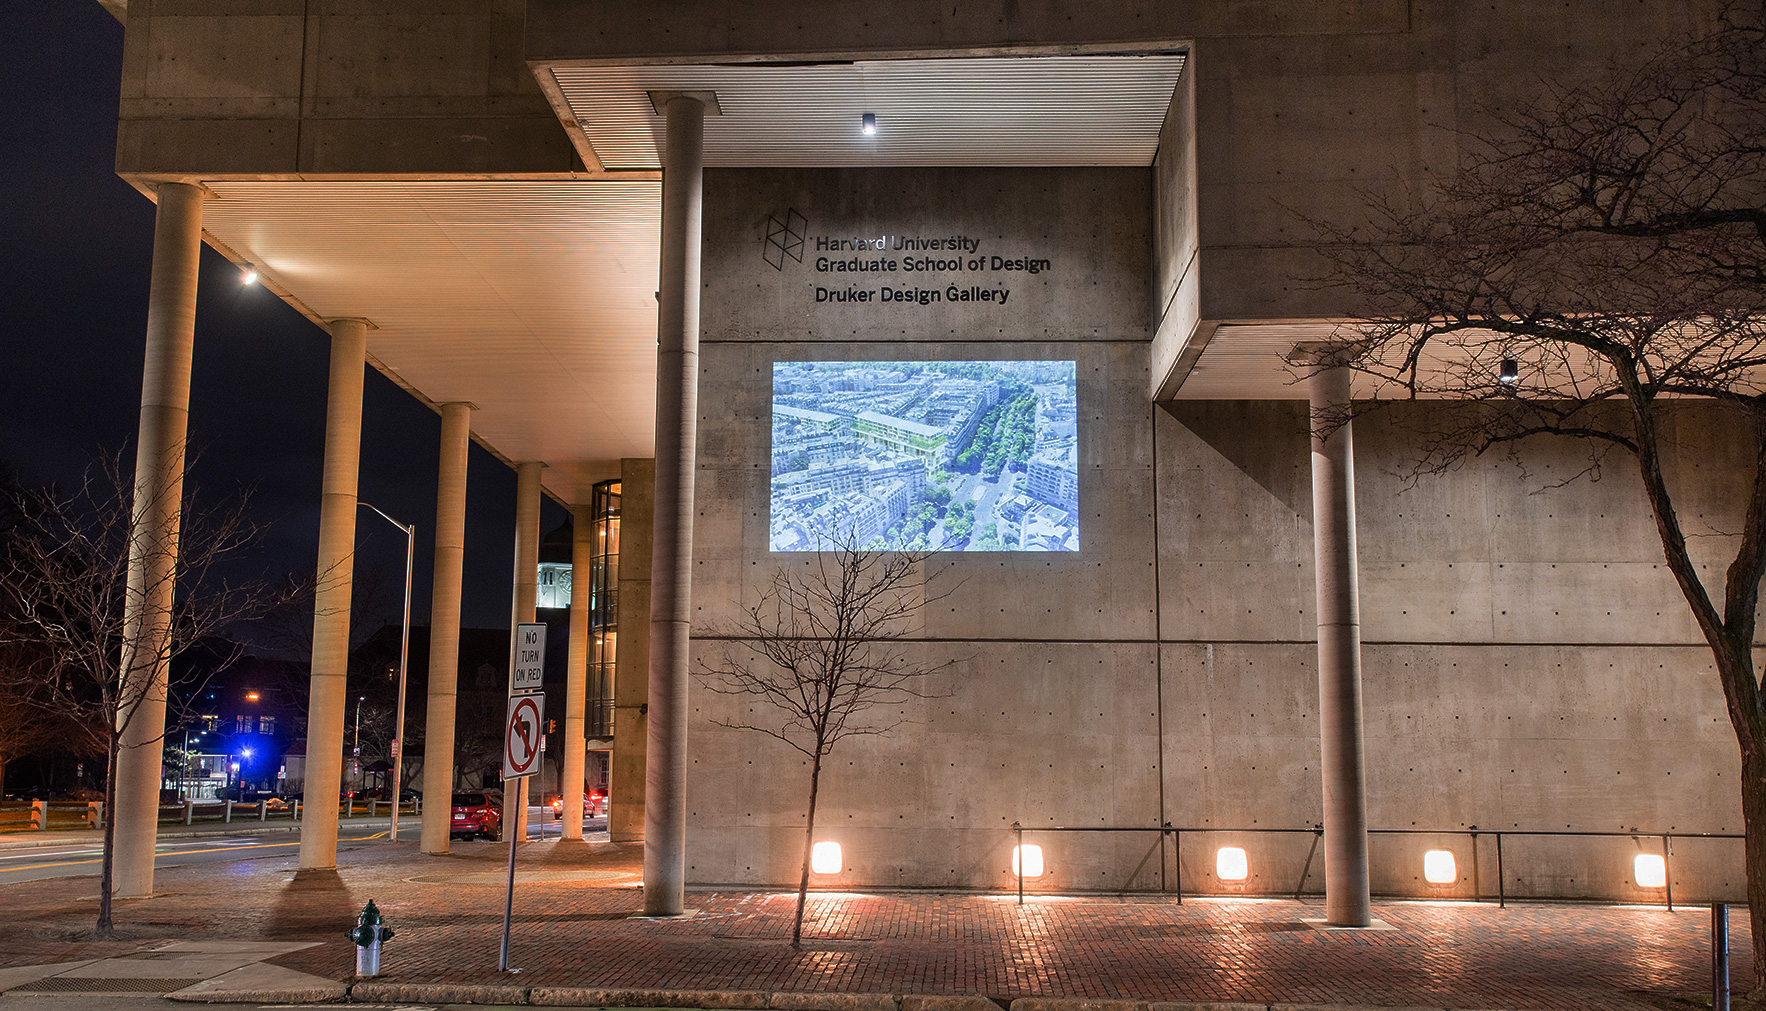 The Cambridge Street facade of Gund hall at night. On the wall is projected an image of a birds-eye view of a Paris block, including a rendering of a Dual-Use building.